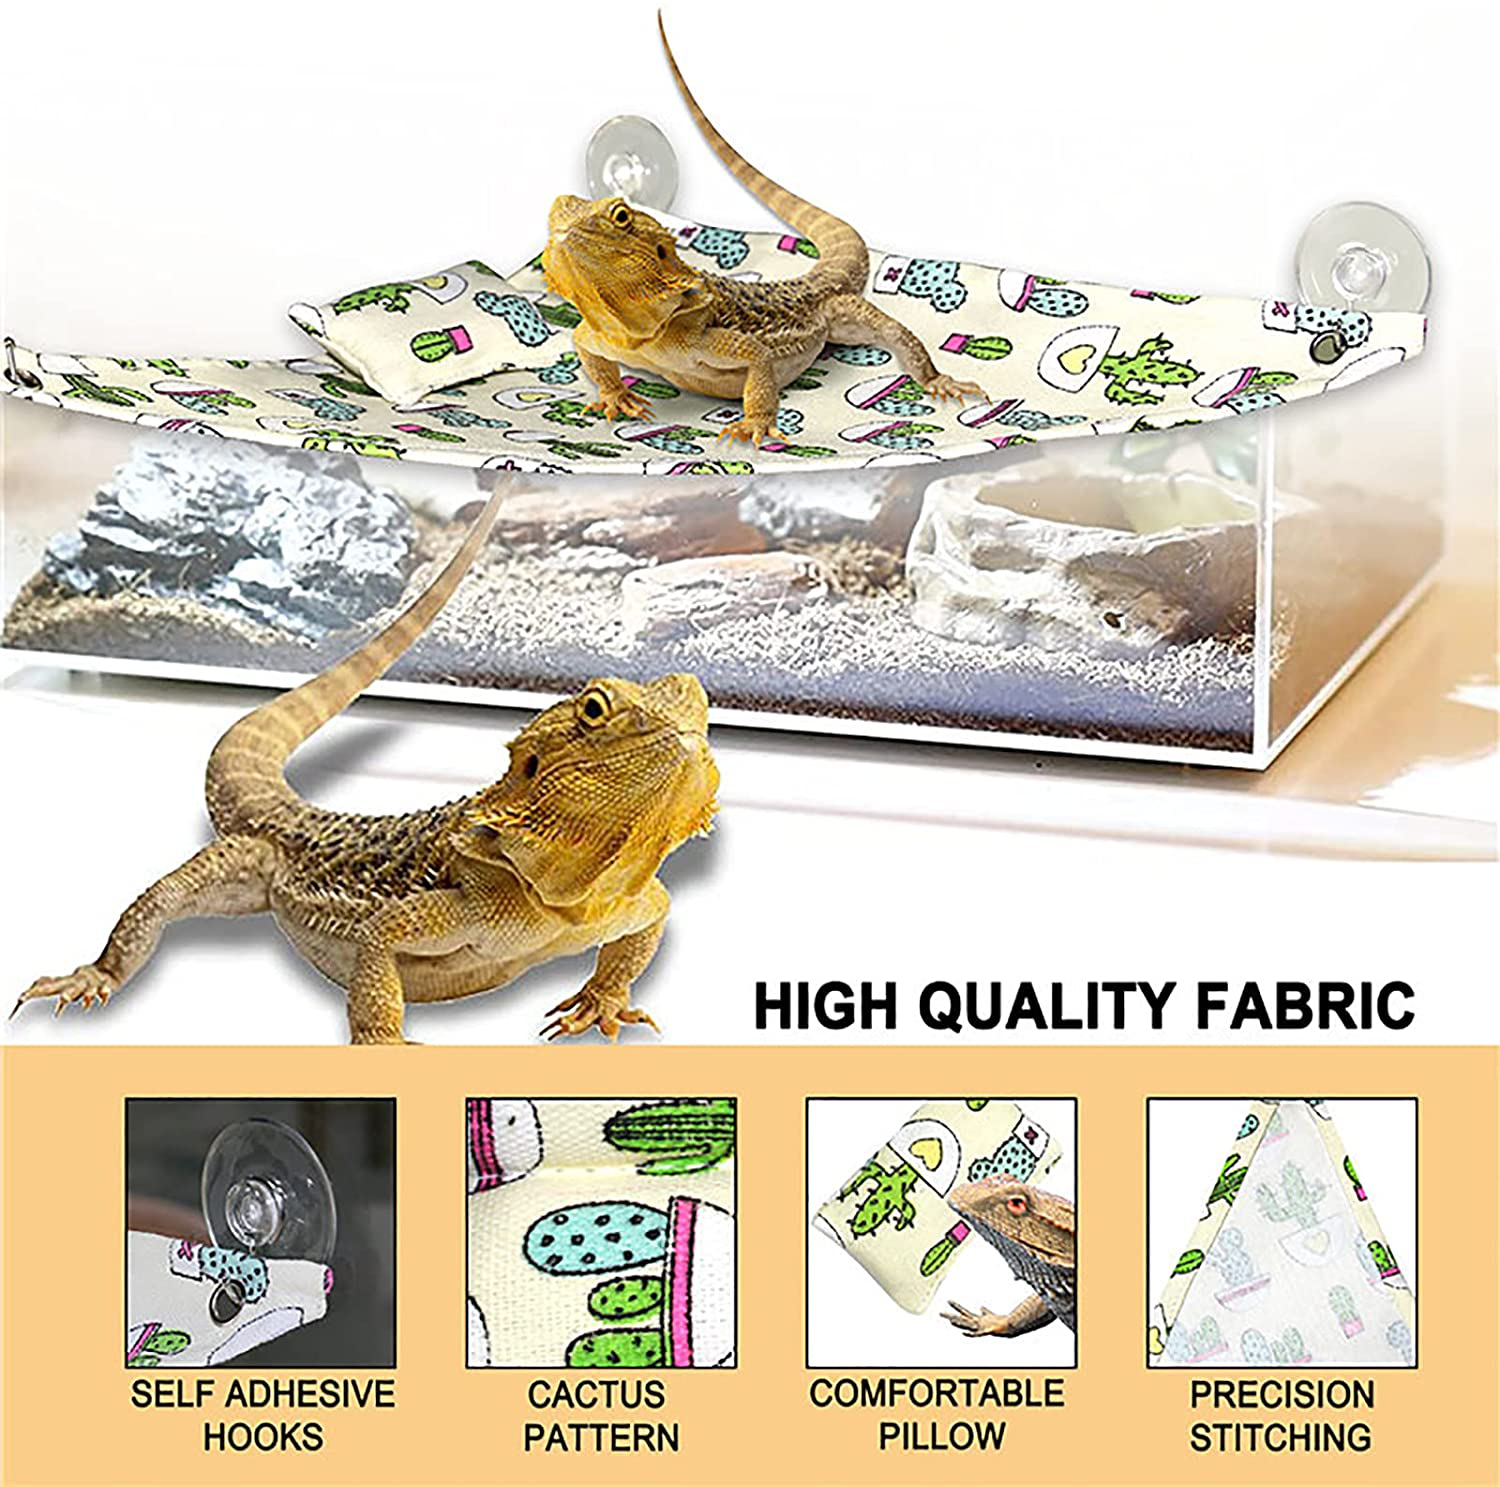 Reptile Lizard Hammock, Bearded Dragon Lounger Ladder Swing Hanging Pet Bed with Adhesive Suction Cup Pillow Triangular Amphibian Terrarium Habitat Decor Accessories for Chameleon Snake Gecko Anole